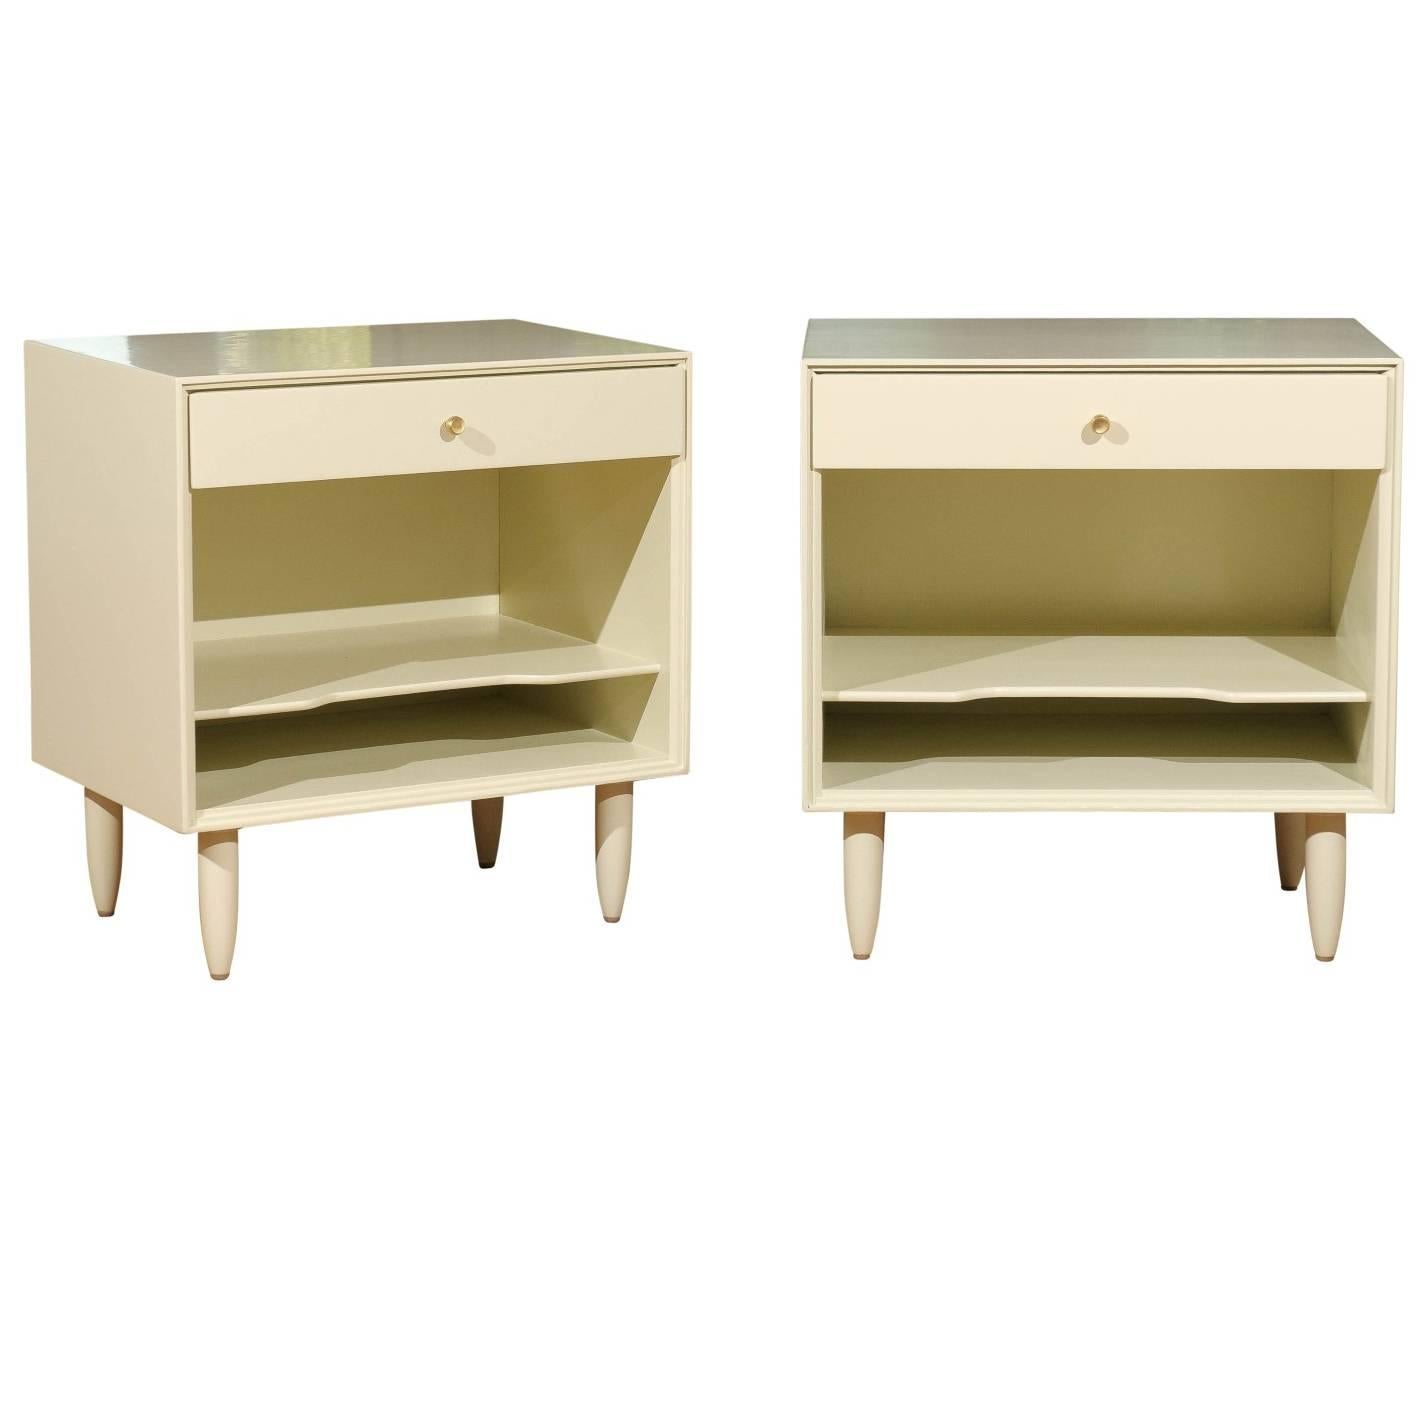 Beautiful Restored Pair of Modern End Tables by John Stuart in Cream Lacquer For Sale